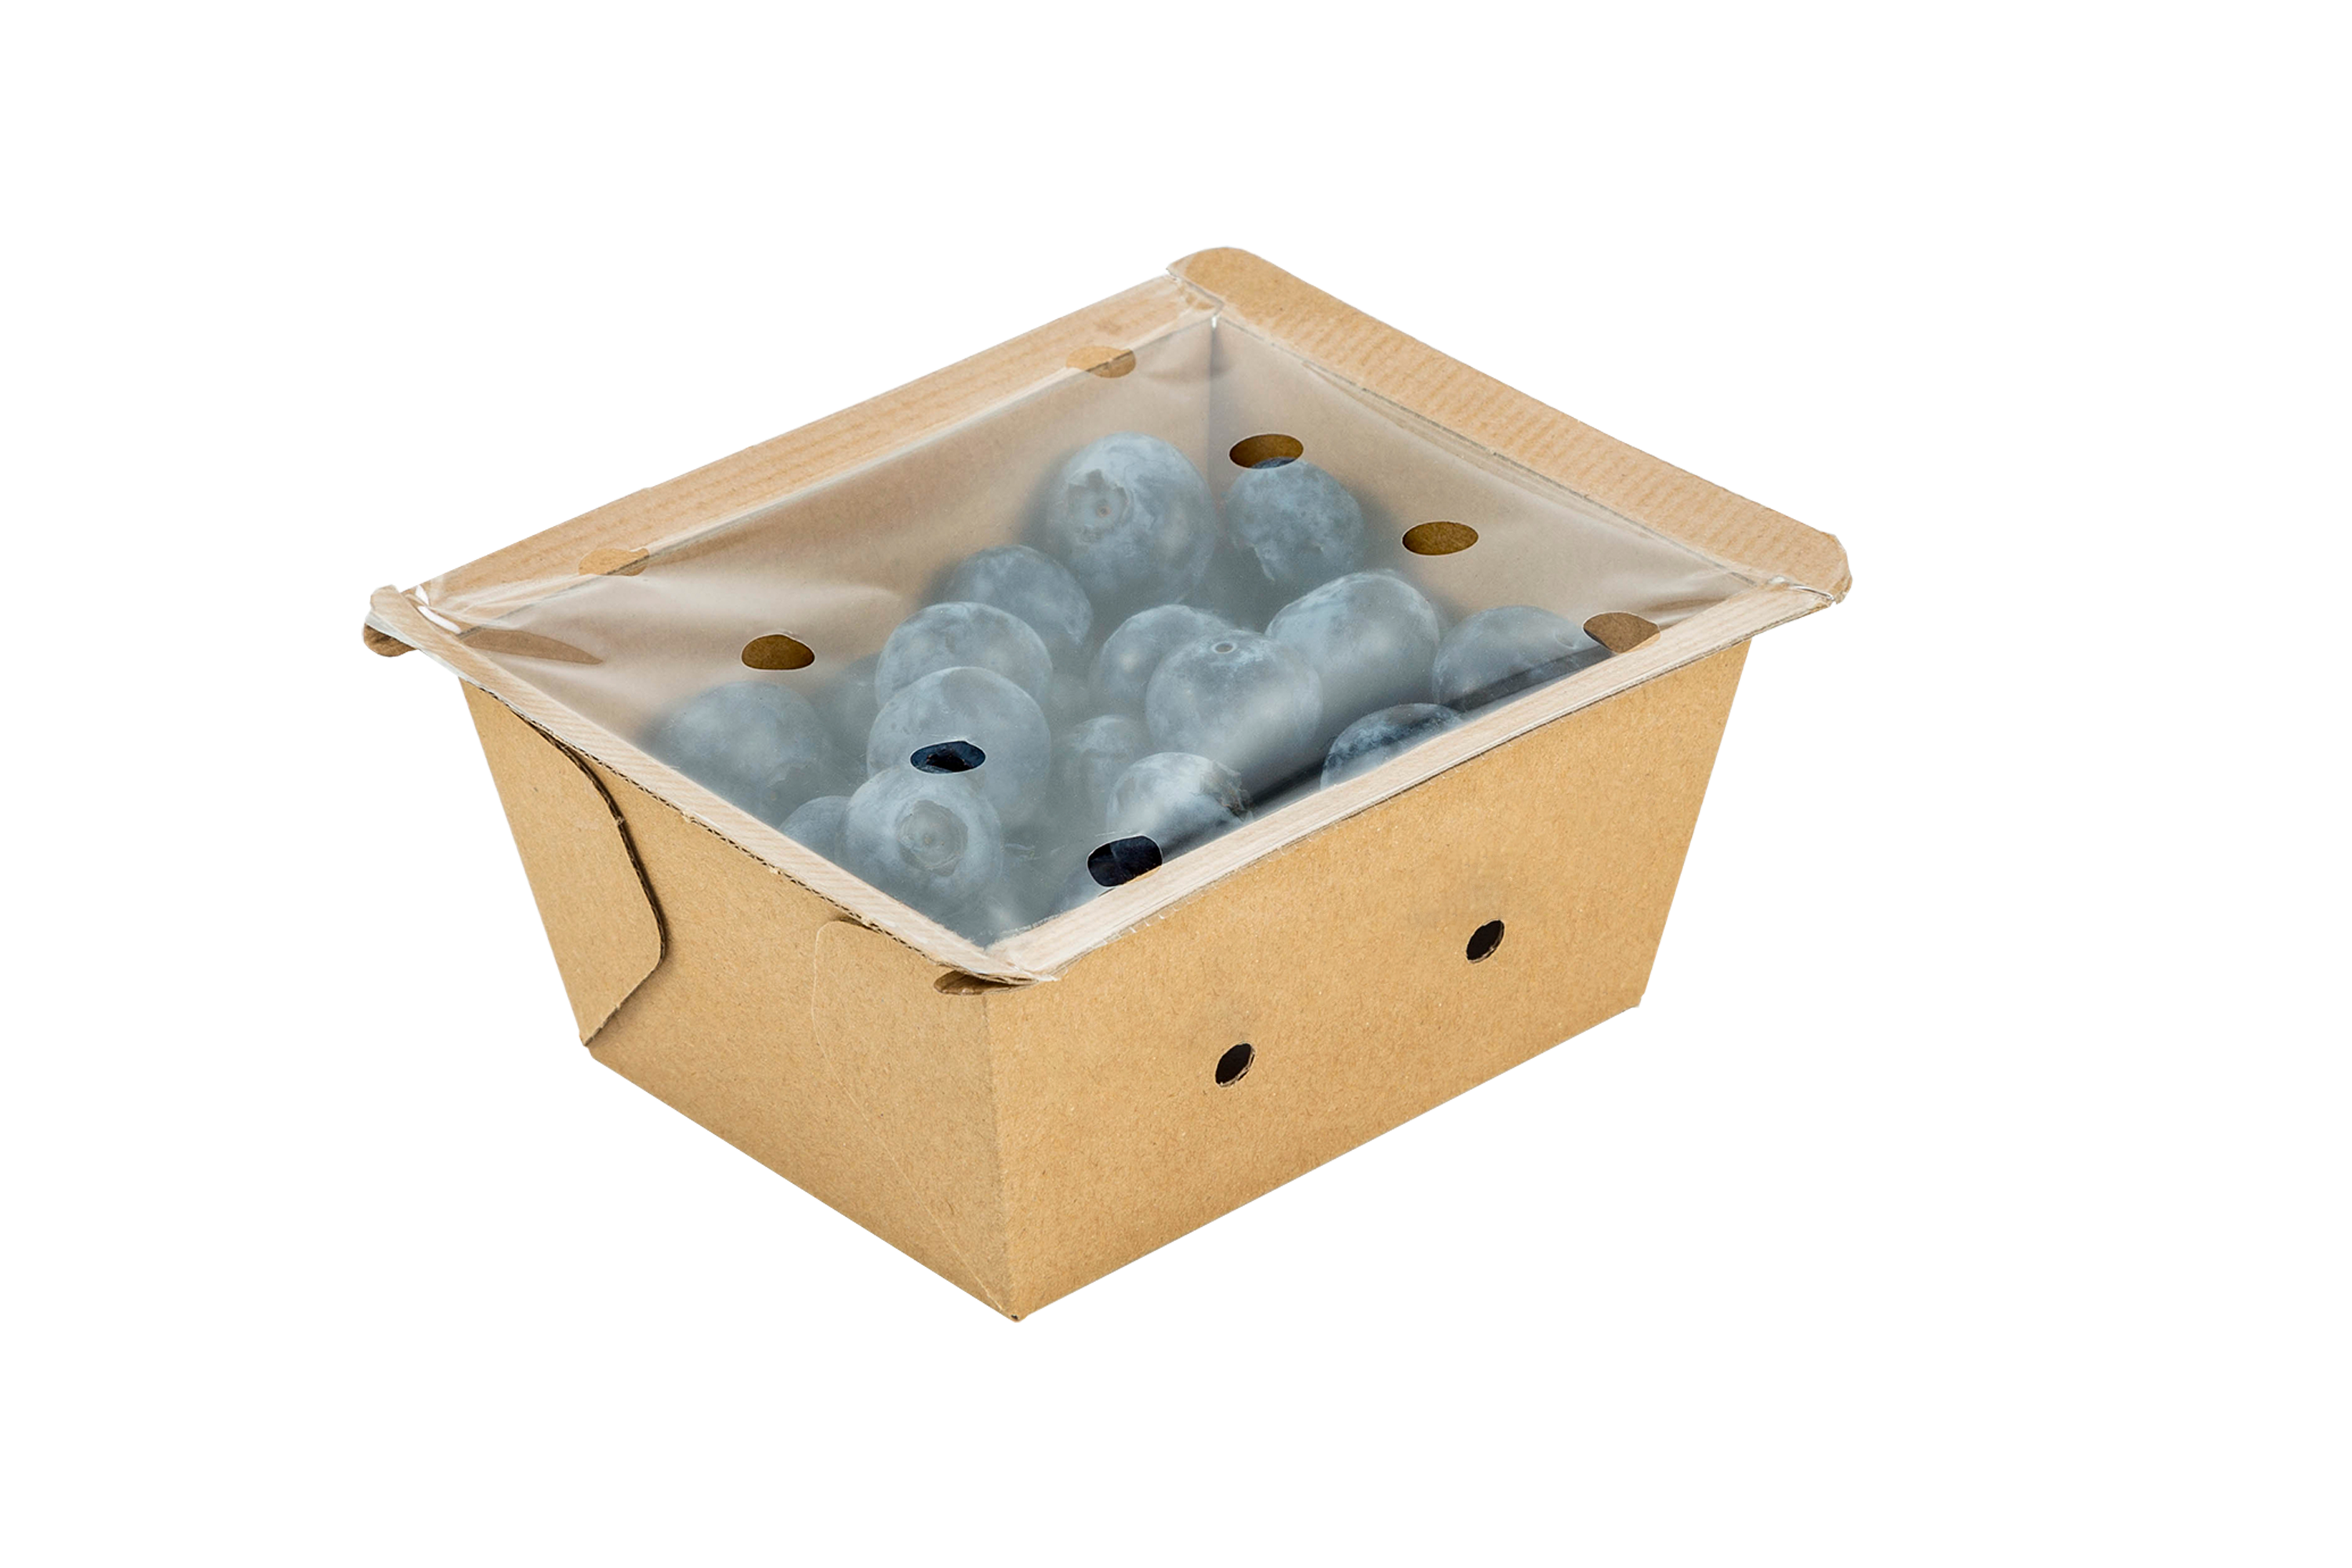 Blueberries from Spain in a sustainable packaging. Copyright: Bionest.